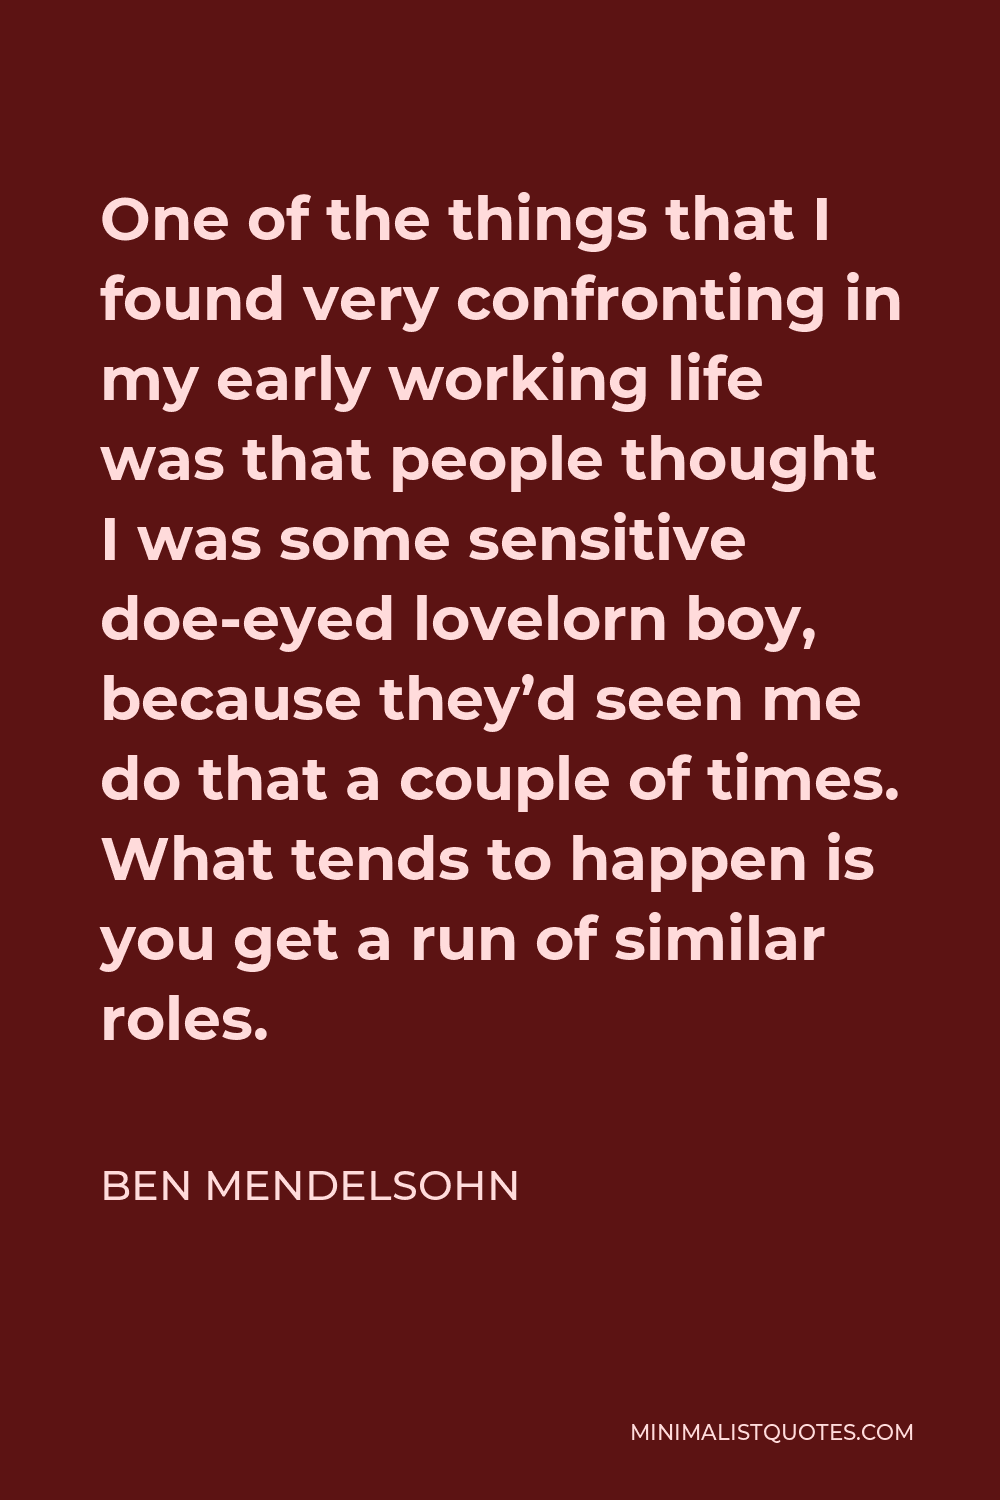 Ben Mendelsohn Quote - One of the things that I found very confronting in my early working life was that people thought I was some sensitive doe-eyed lovelorn boy, because they’d seen me do that a couple of times. What tends to happen is you get a run of similar roles.